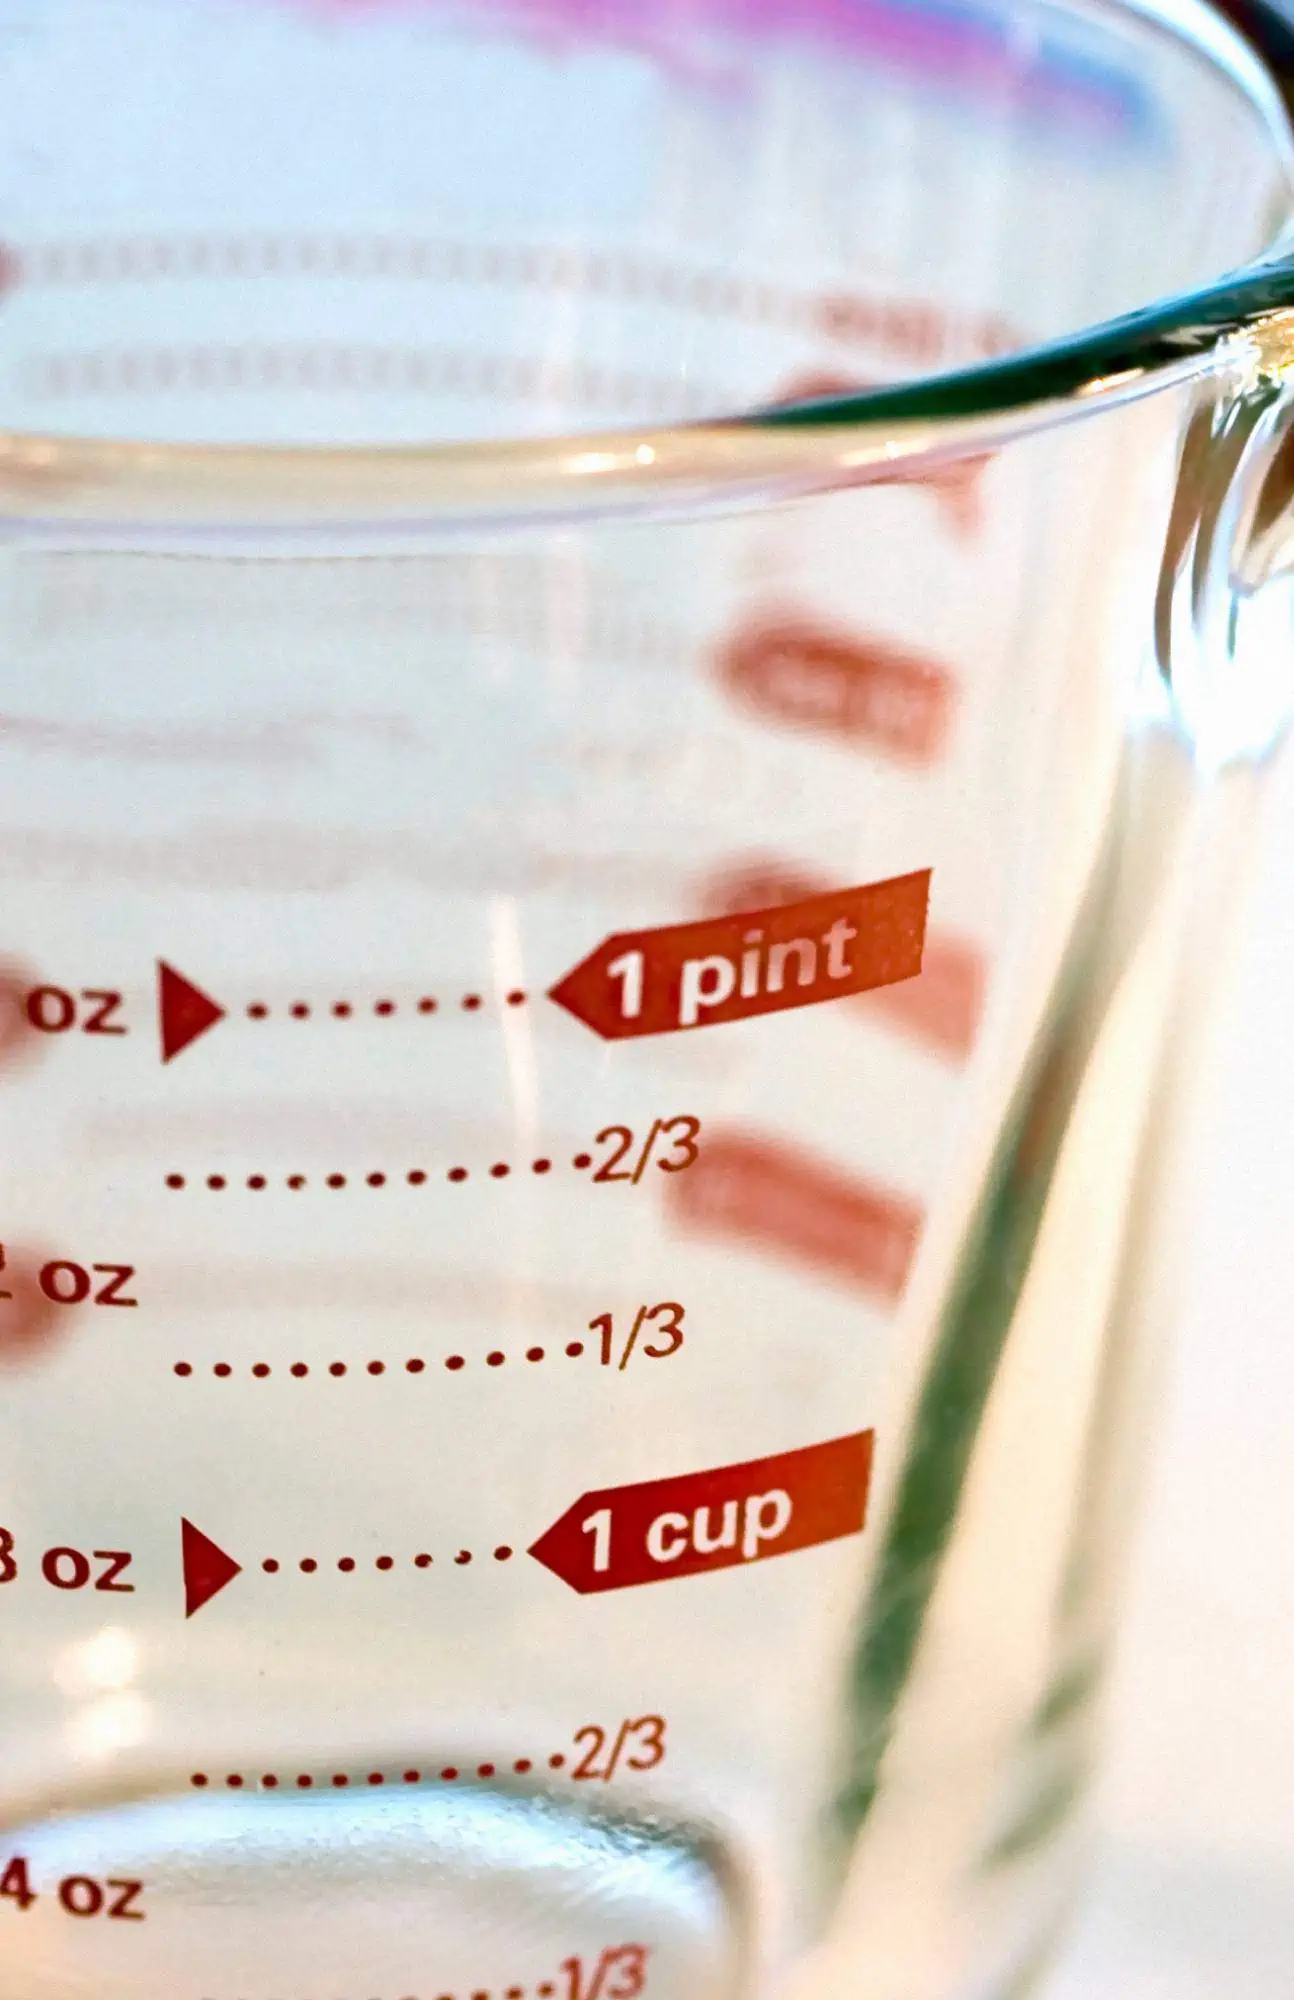 Pyrex liquid measuring cup showing number of ounces in a pint and cup. 